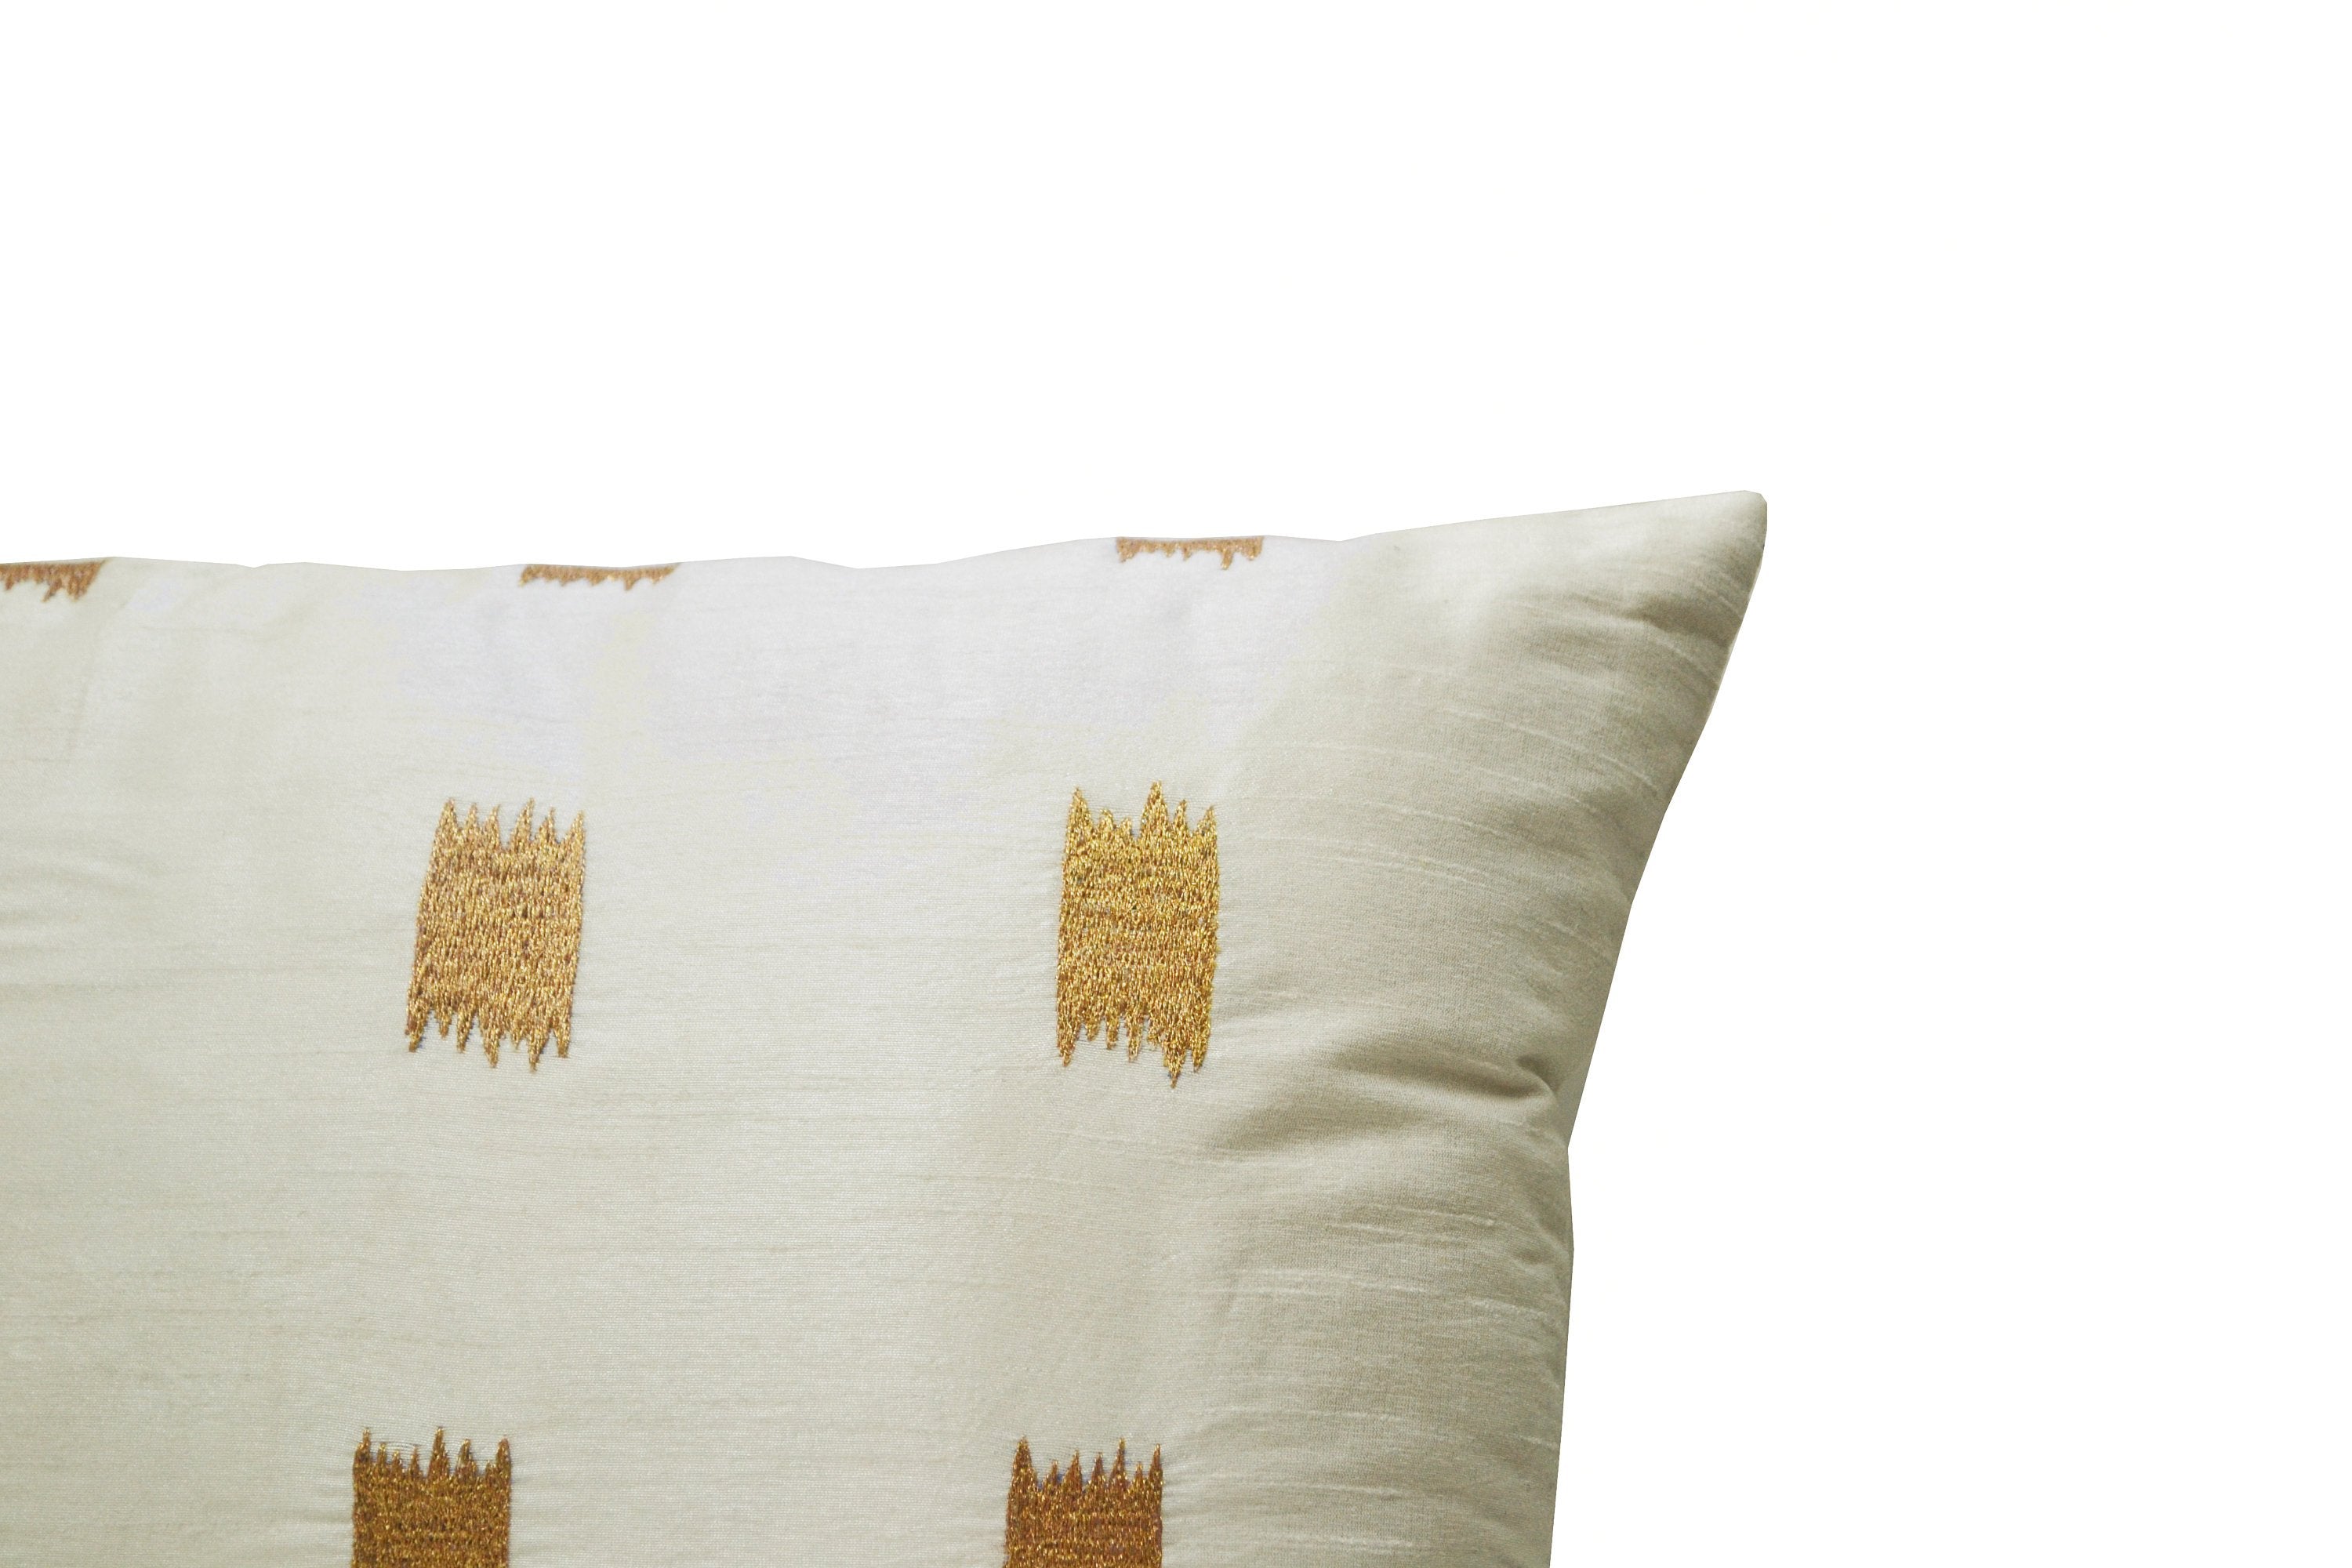 Amore Beaute silk pillow looks gorgeous in white and gold in most rooms - Bedroom, Sitting Room or Living Room.